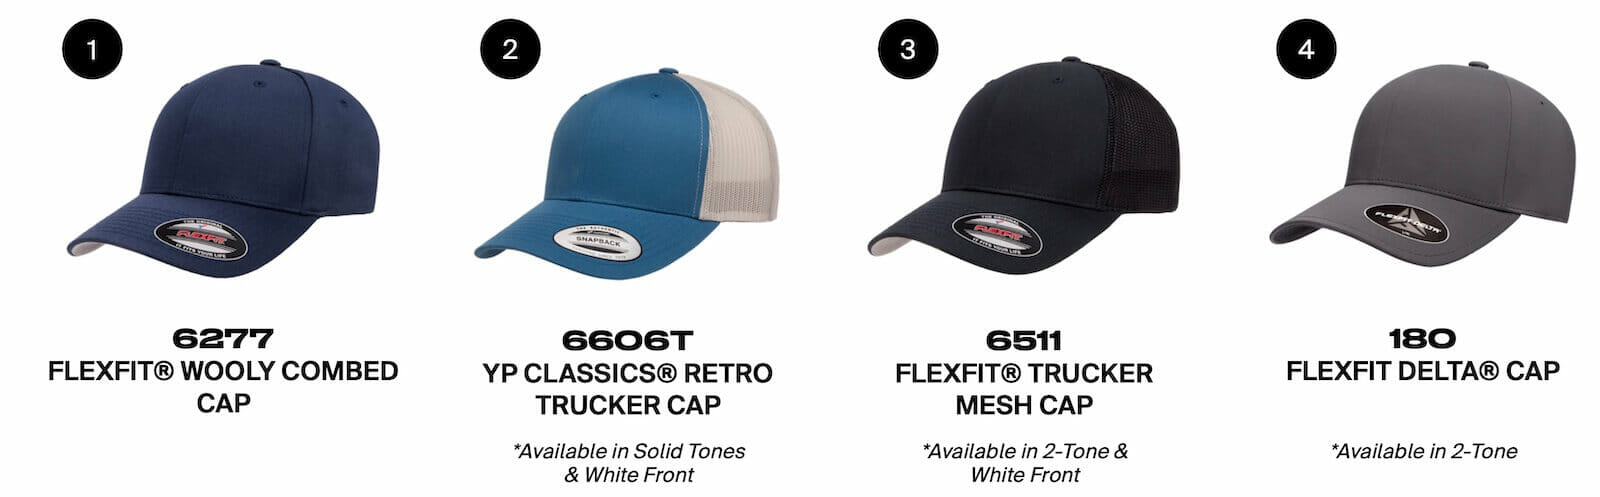 Custom Flexfit Hats With Monterey Embroidery Company 